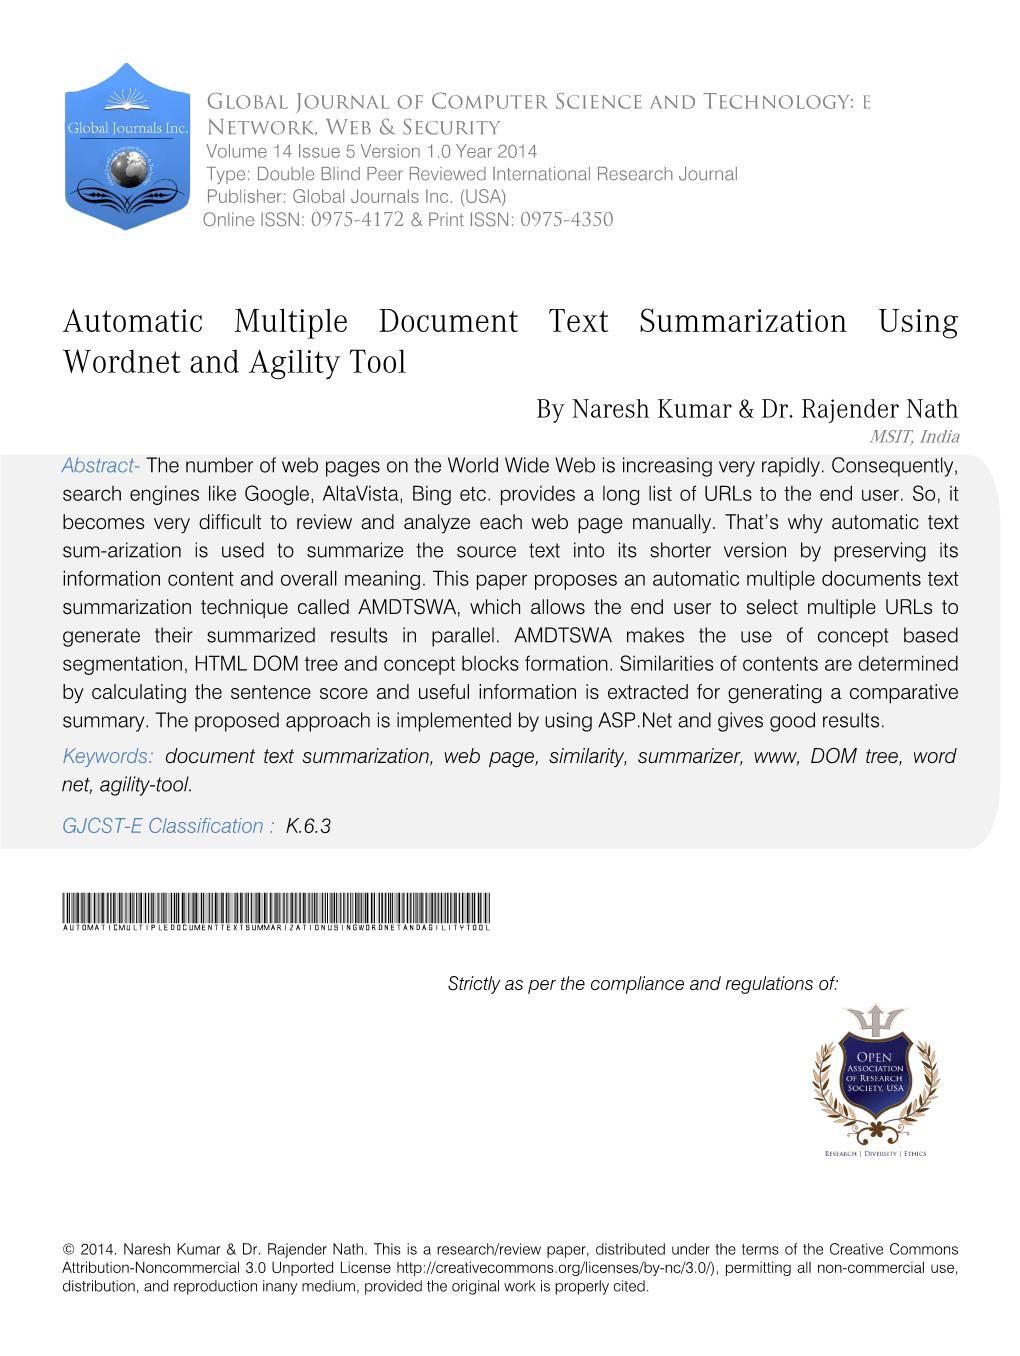 Automatic Multiple Document Text Summarization Using Wordnet and Agility Tool